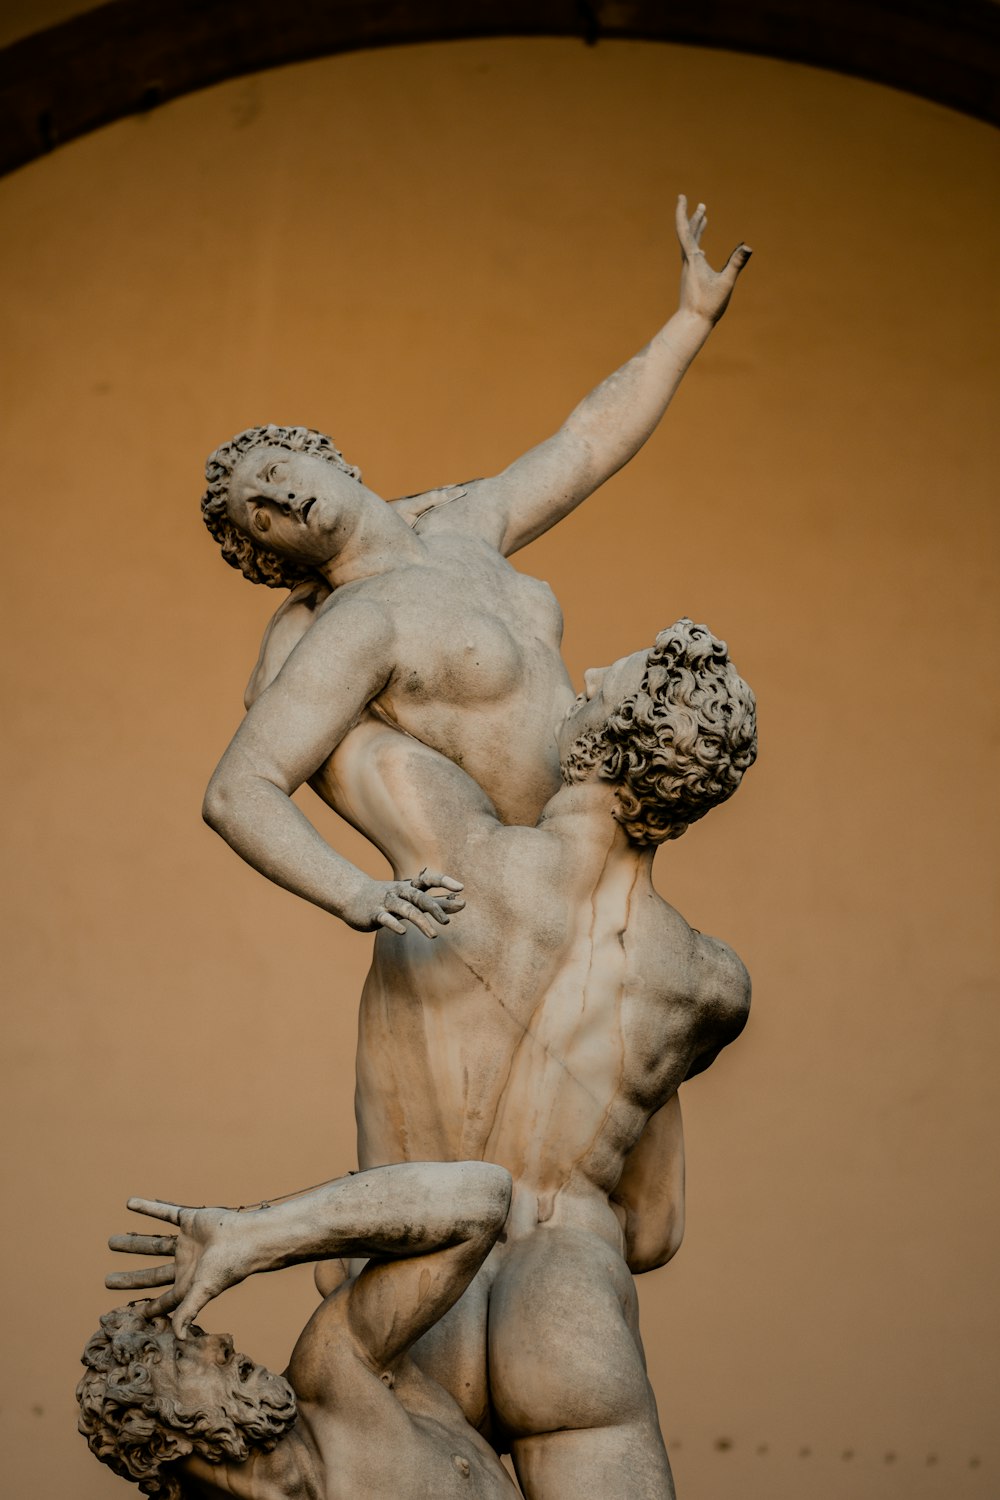 a statue of two men holding each other